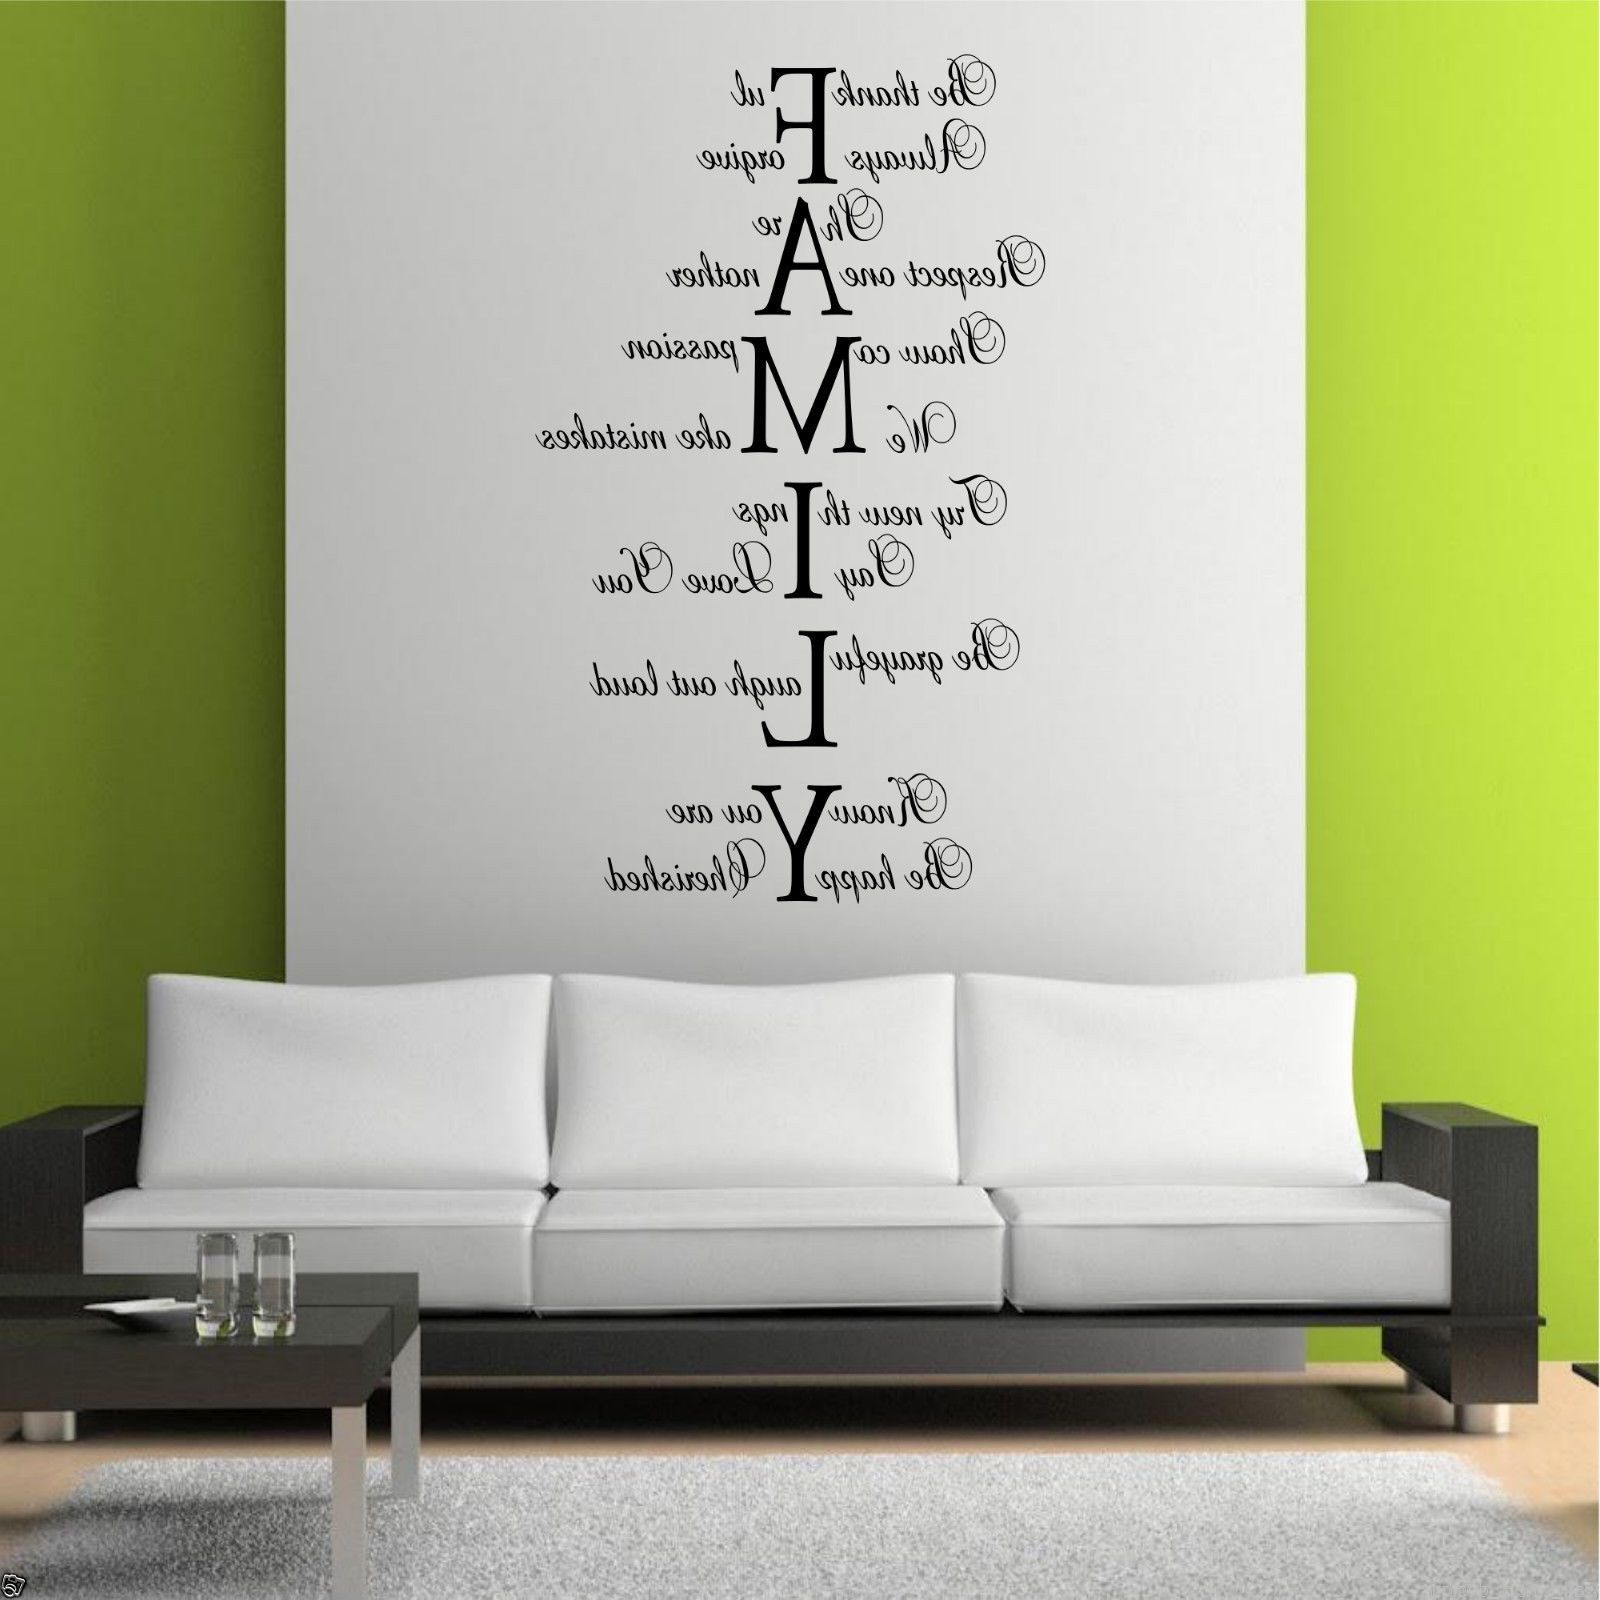 Popular B Awesome Www Wall Cool Www Wall Art Stickers – Wall Decoration Ideas Within Wall Art Stickers (View 8 of 15)